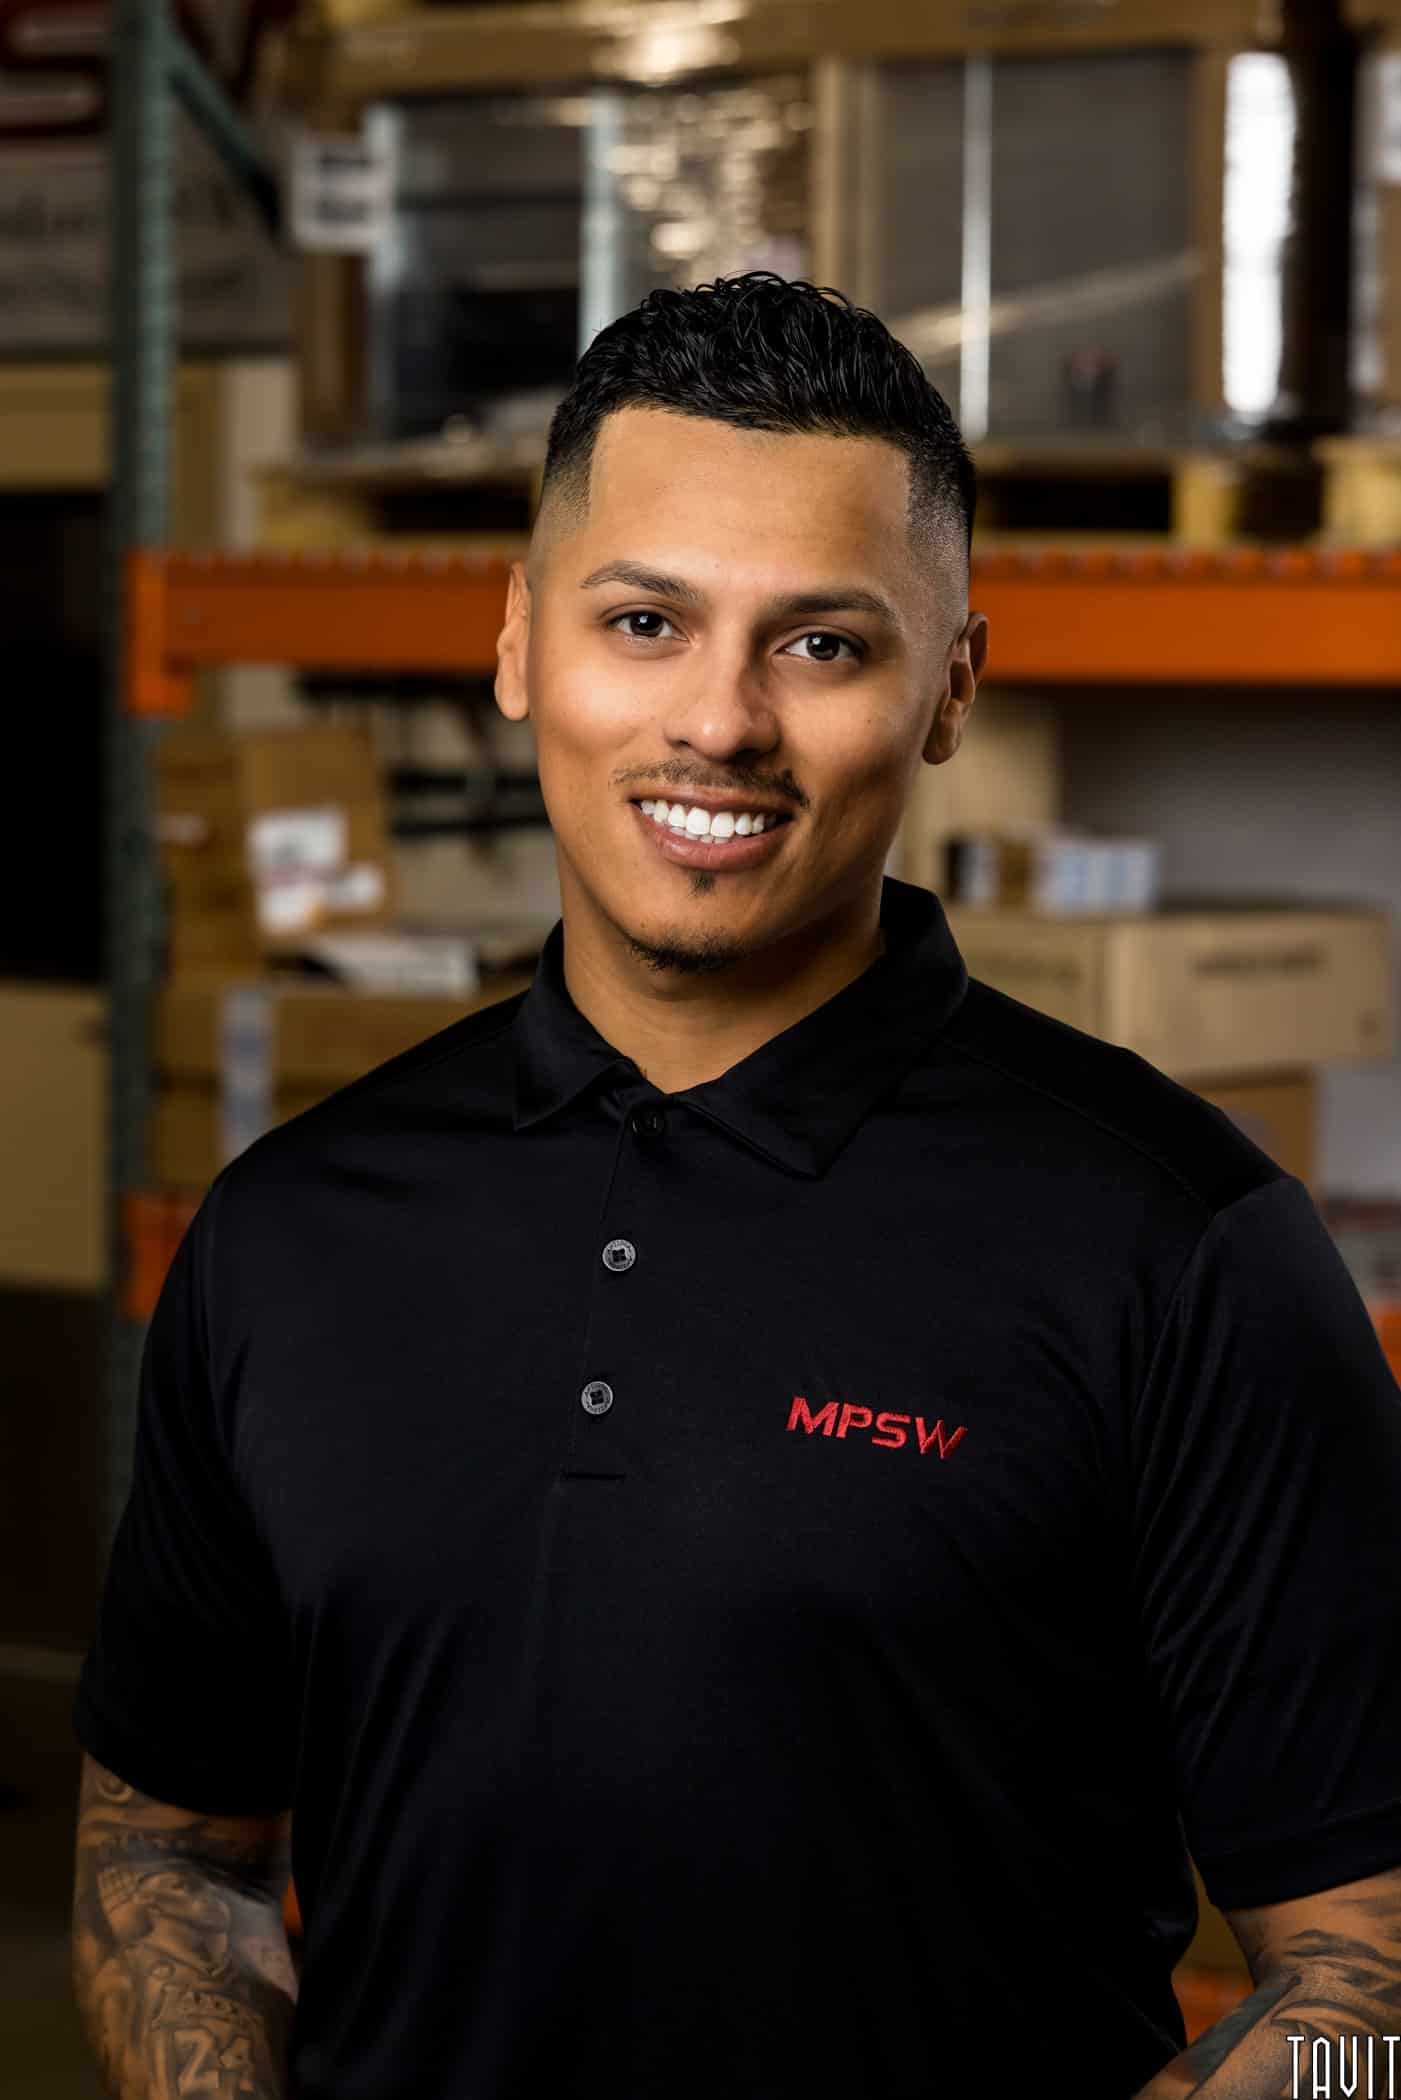 business headshot of man with MPSW shirt on